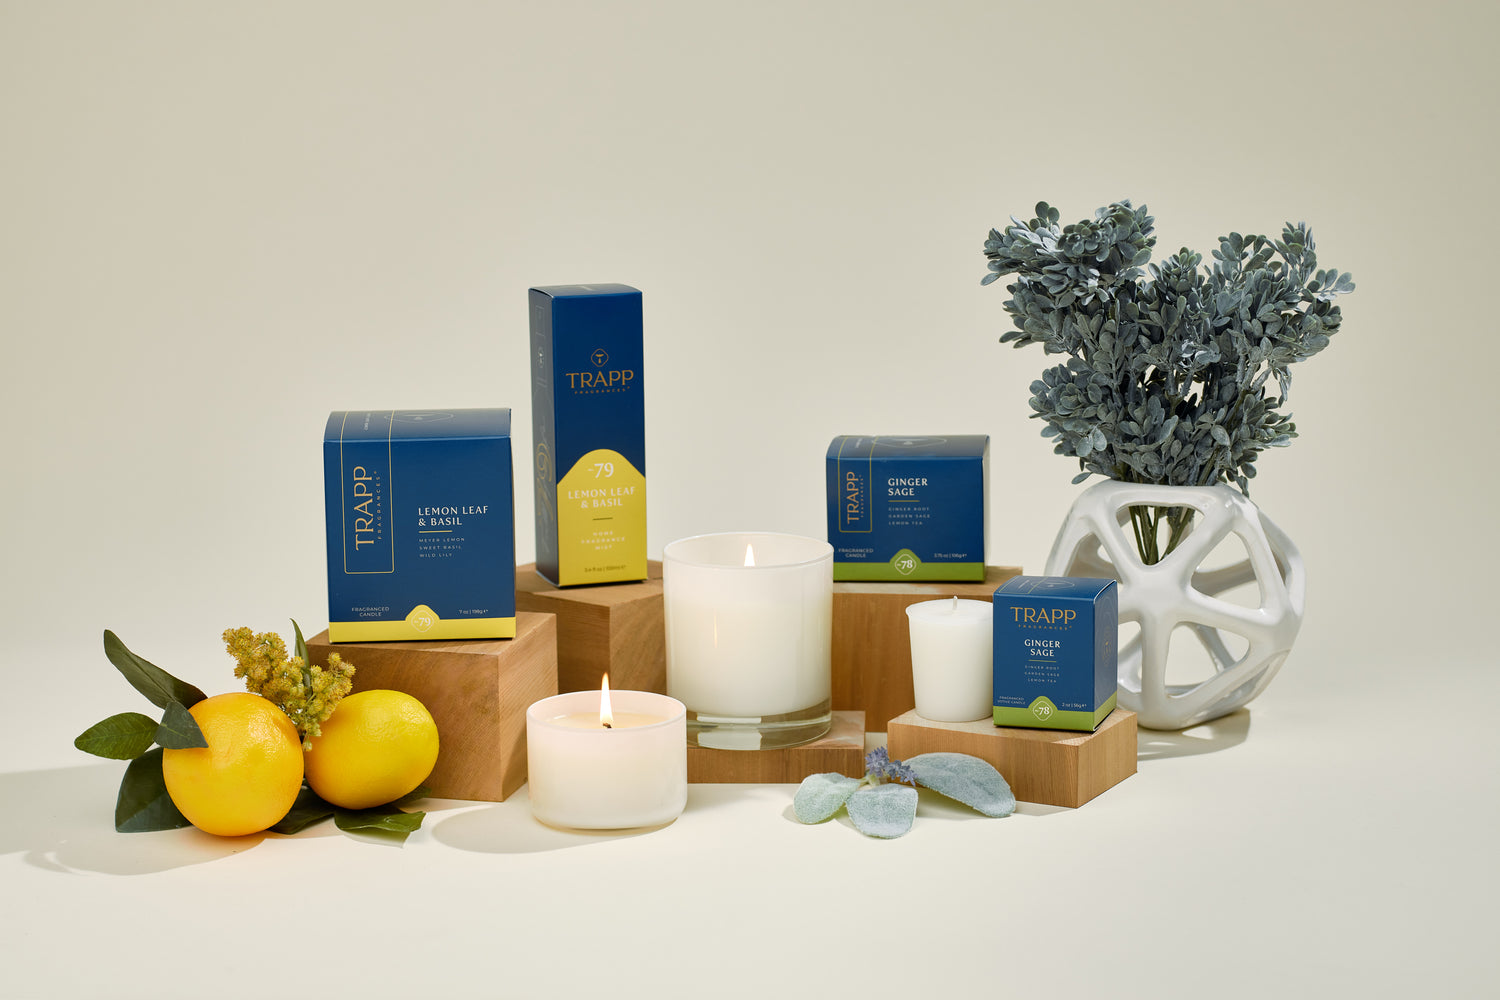 3-Wick Candles – Trapp Fragrances